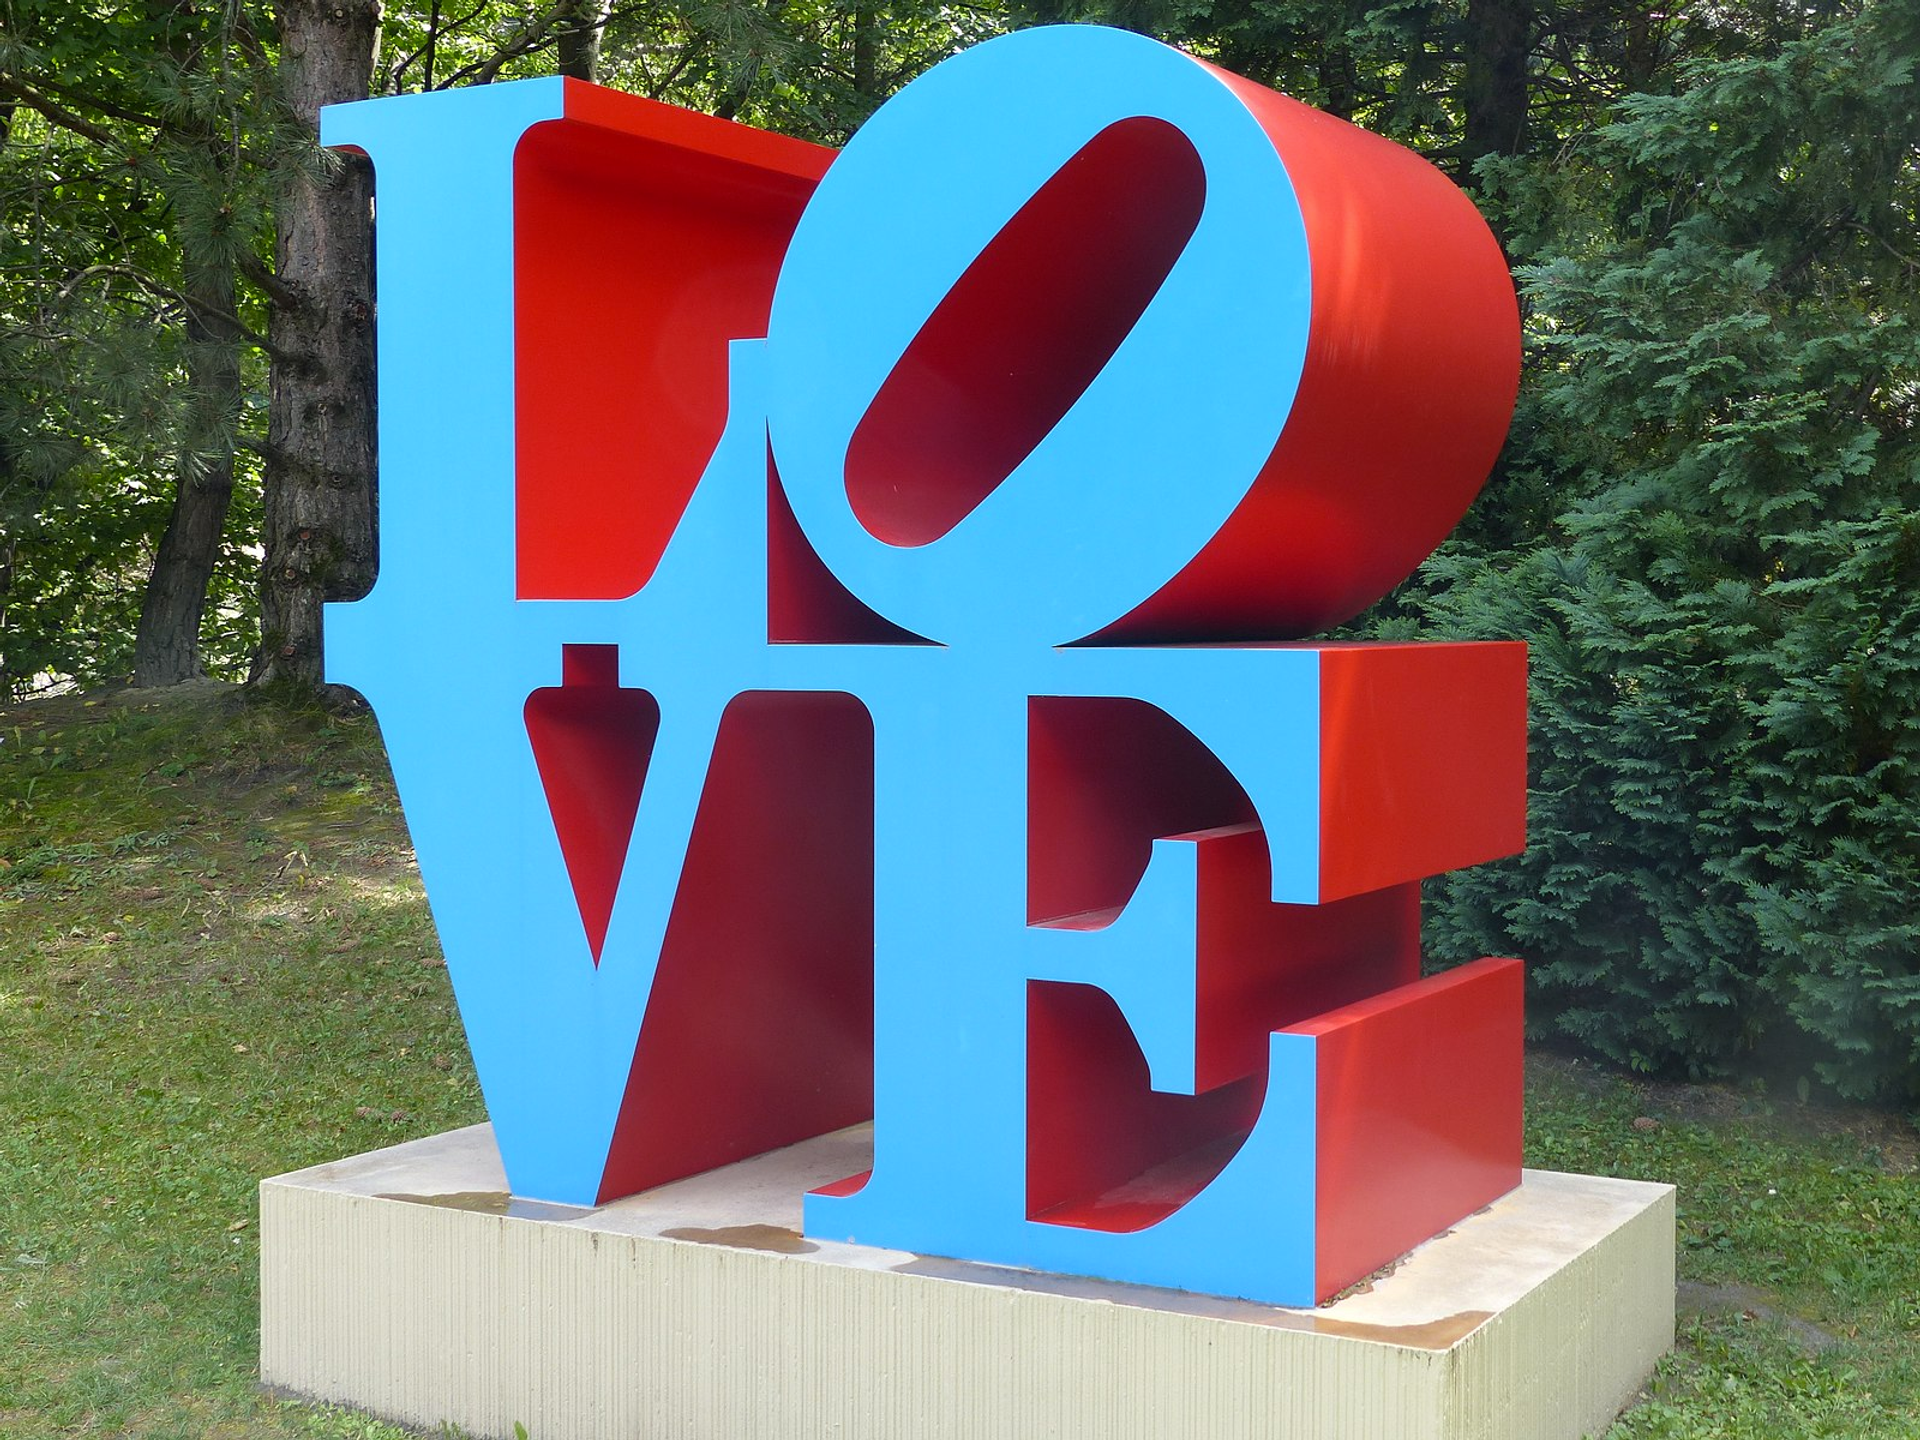 The word LOVE is sculpted in giant letters, in red and blue, by artist Robert Indiana.